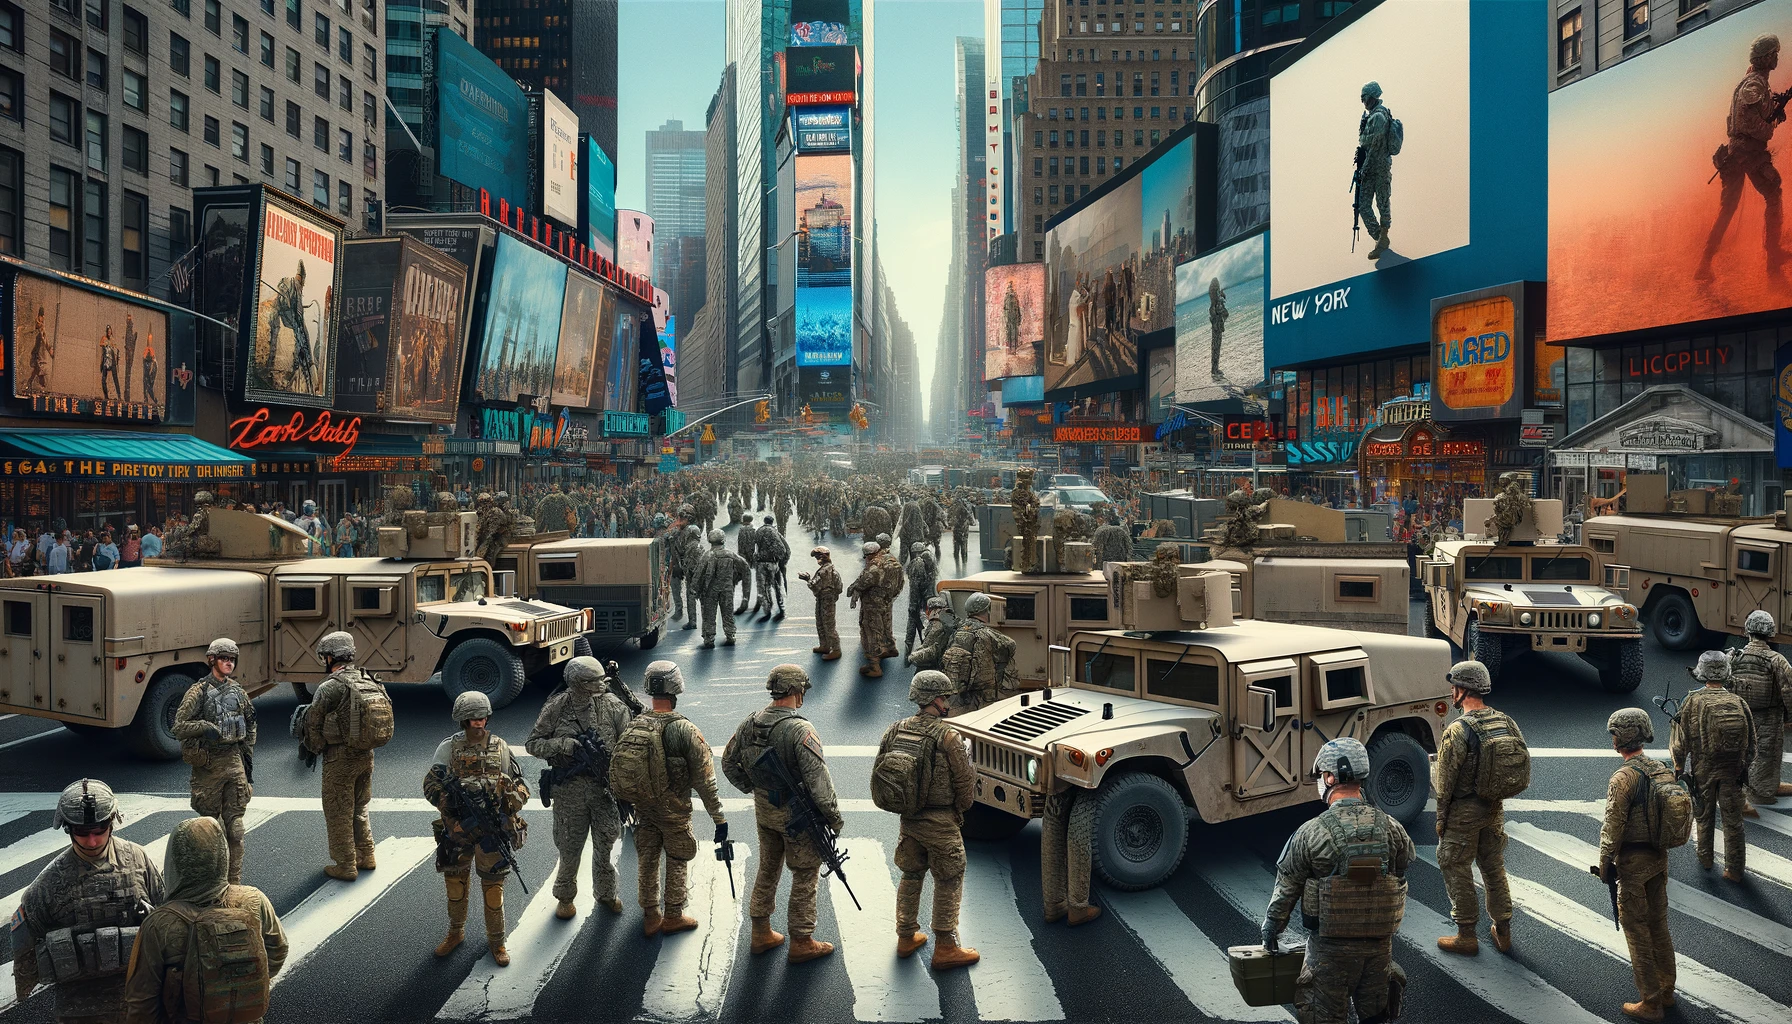 Military Surge in New York: Navigating the Complexities of Urban Security Operations